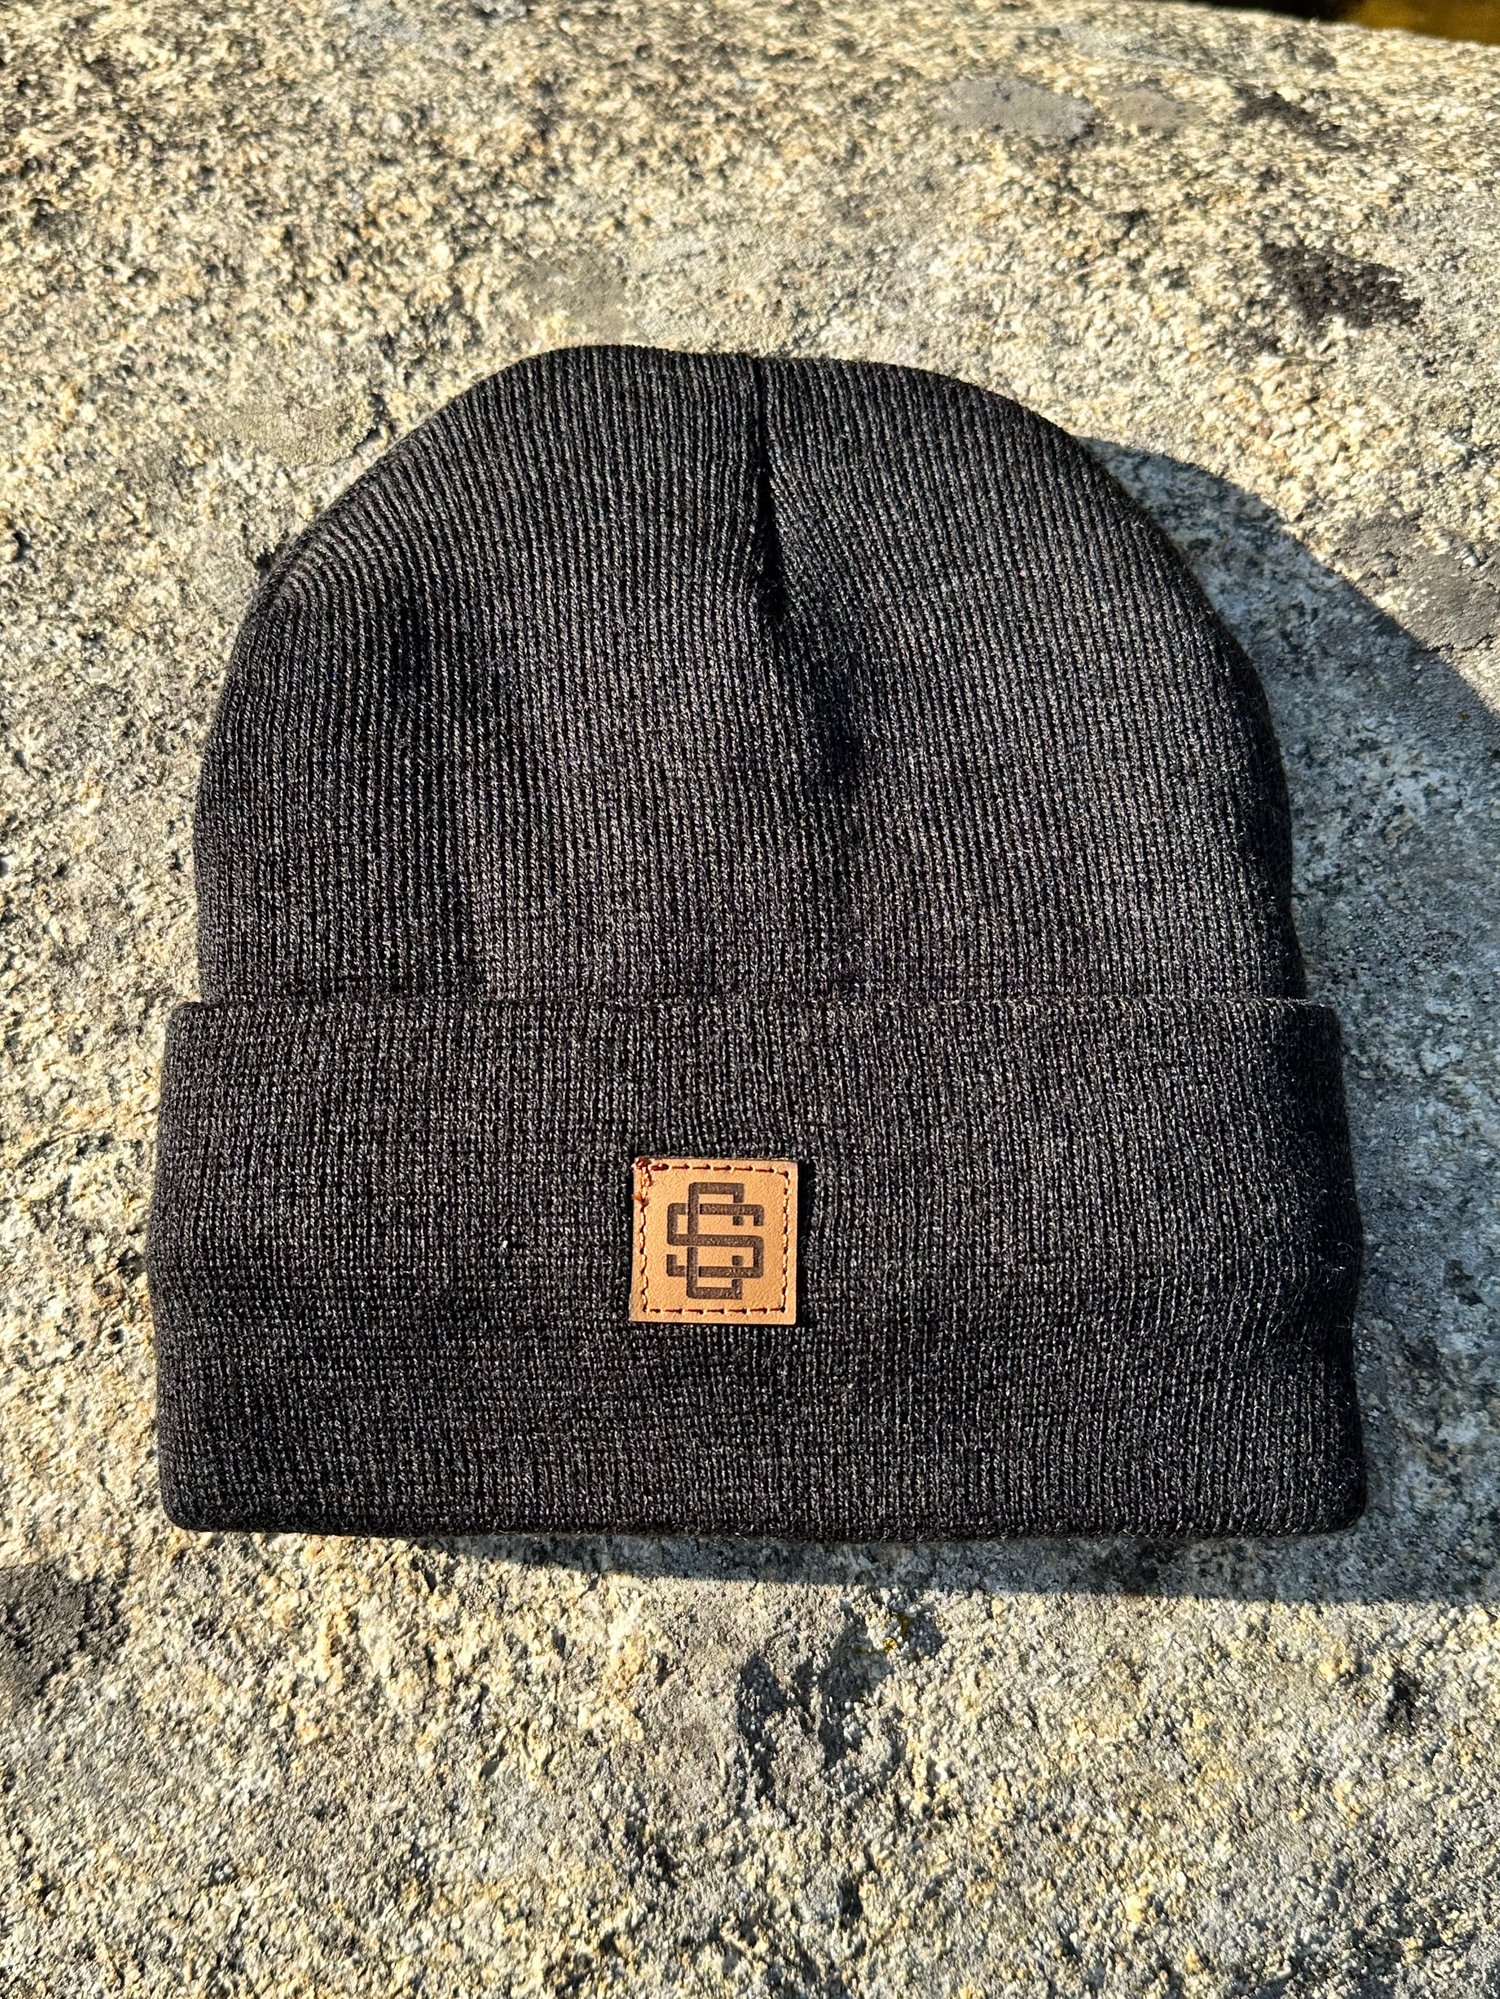 Black Sherpa-Lined Beanie with Brown Leather patch